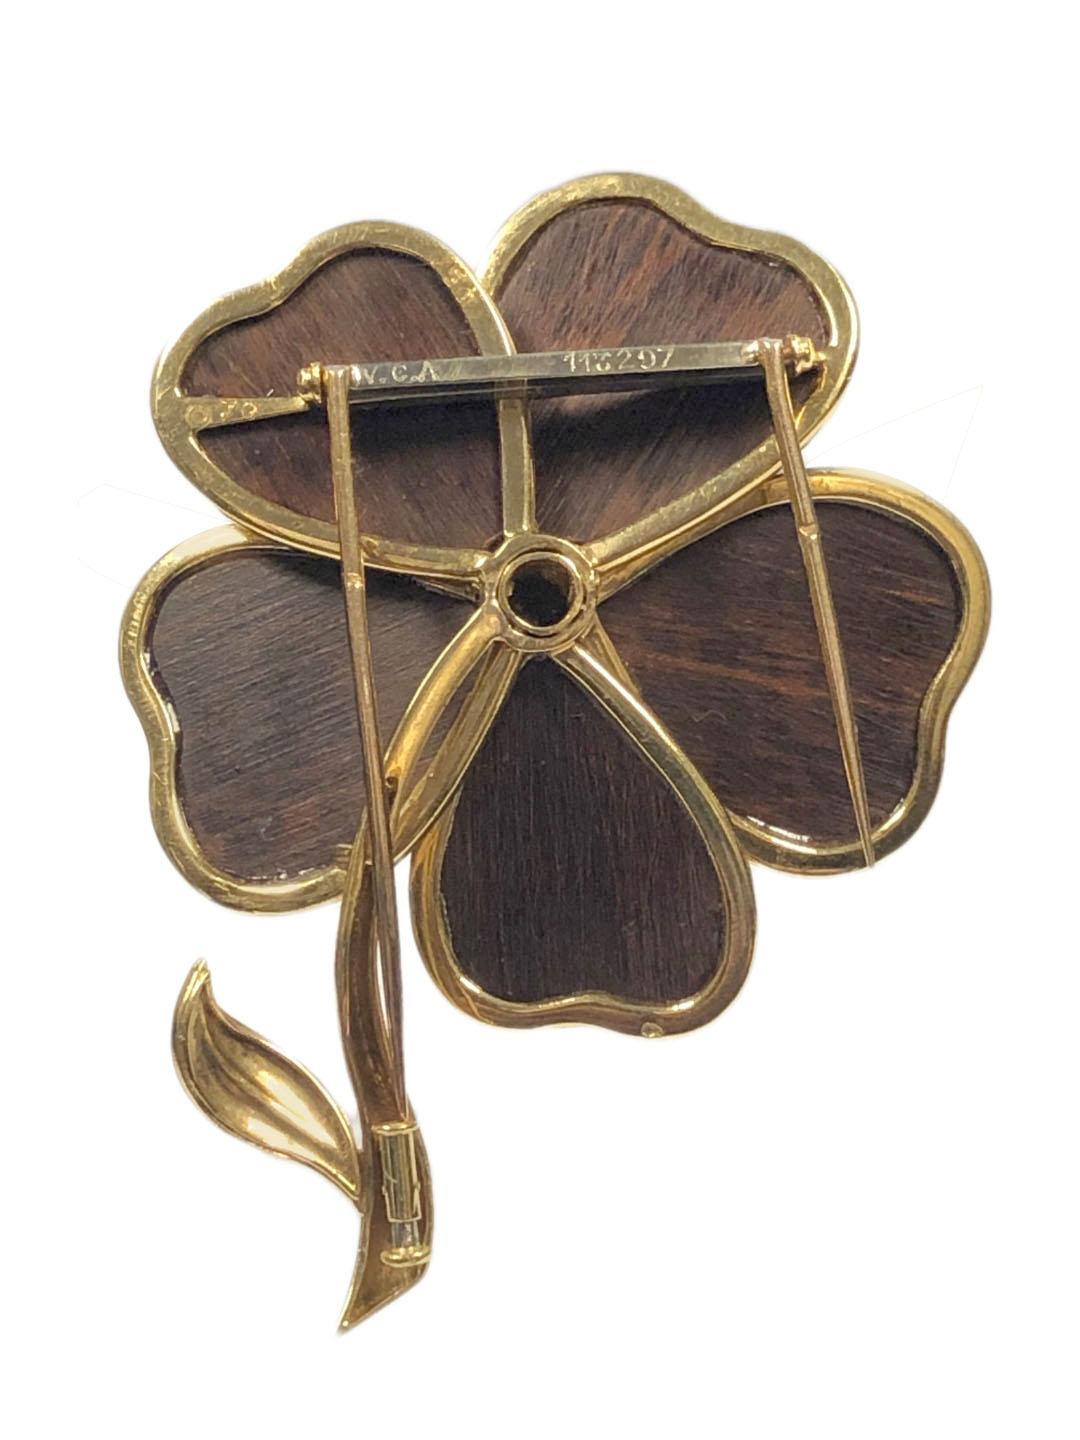 Circa 1970s Van Cleef & Arpels Paris 18k Yellow Gold Flower Clip Brooch, measuring 2 3/4 inches in length with the flower portion measuring 2 inches in diameter. 5 Wood Pedals and a center set with 3 Round Brilliant cut Diamonds totaling .15 Carat.